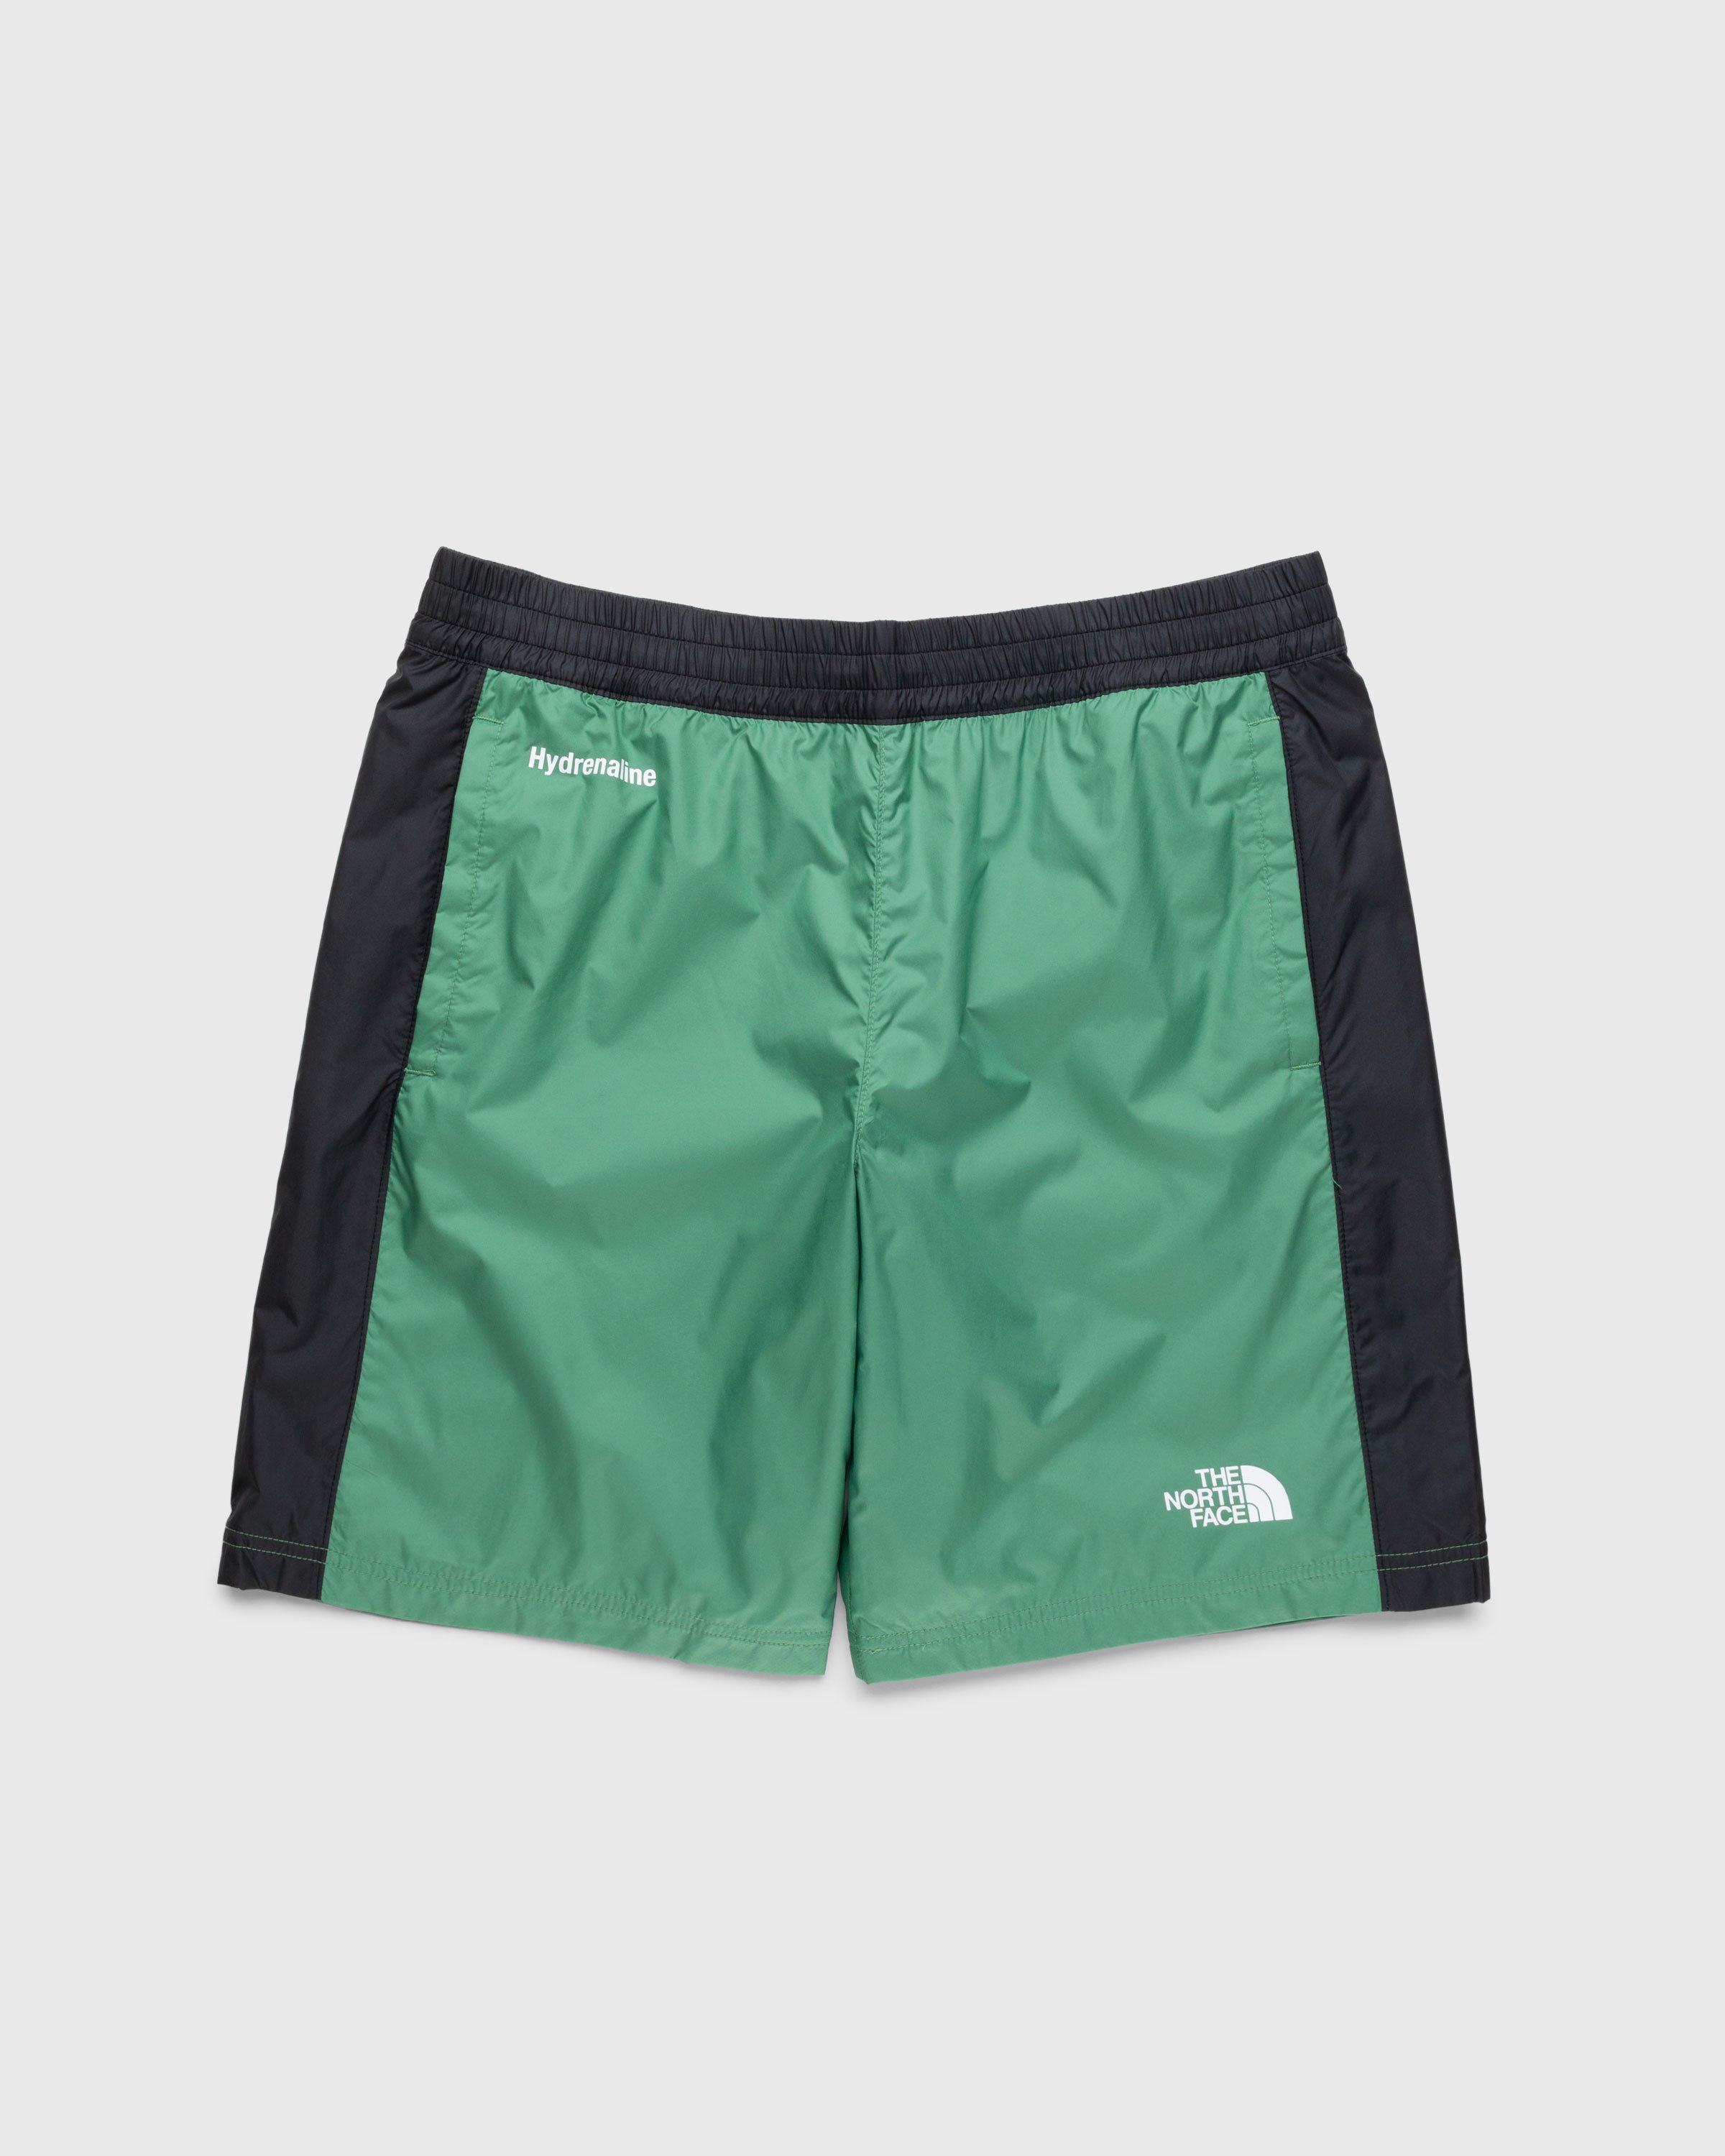 The North Face - Hydrenaline Short Deep Grass Green - Clothing - Green - Image 1